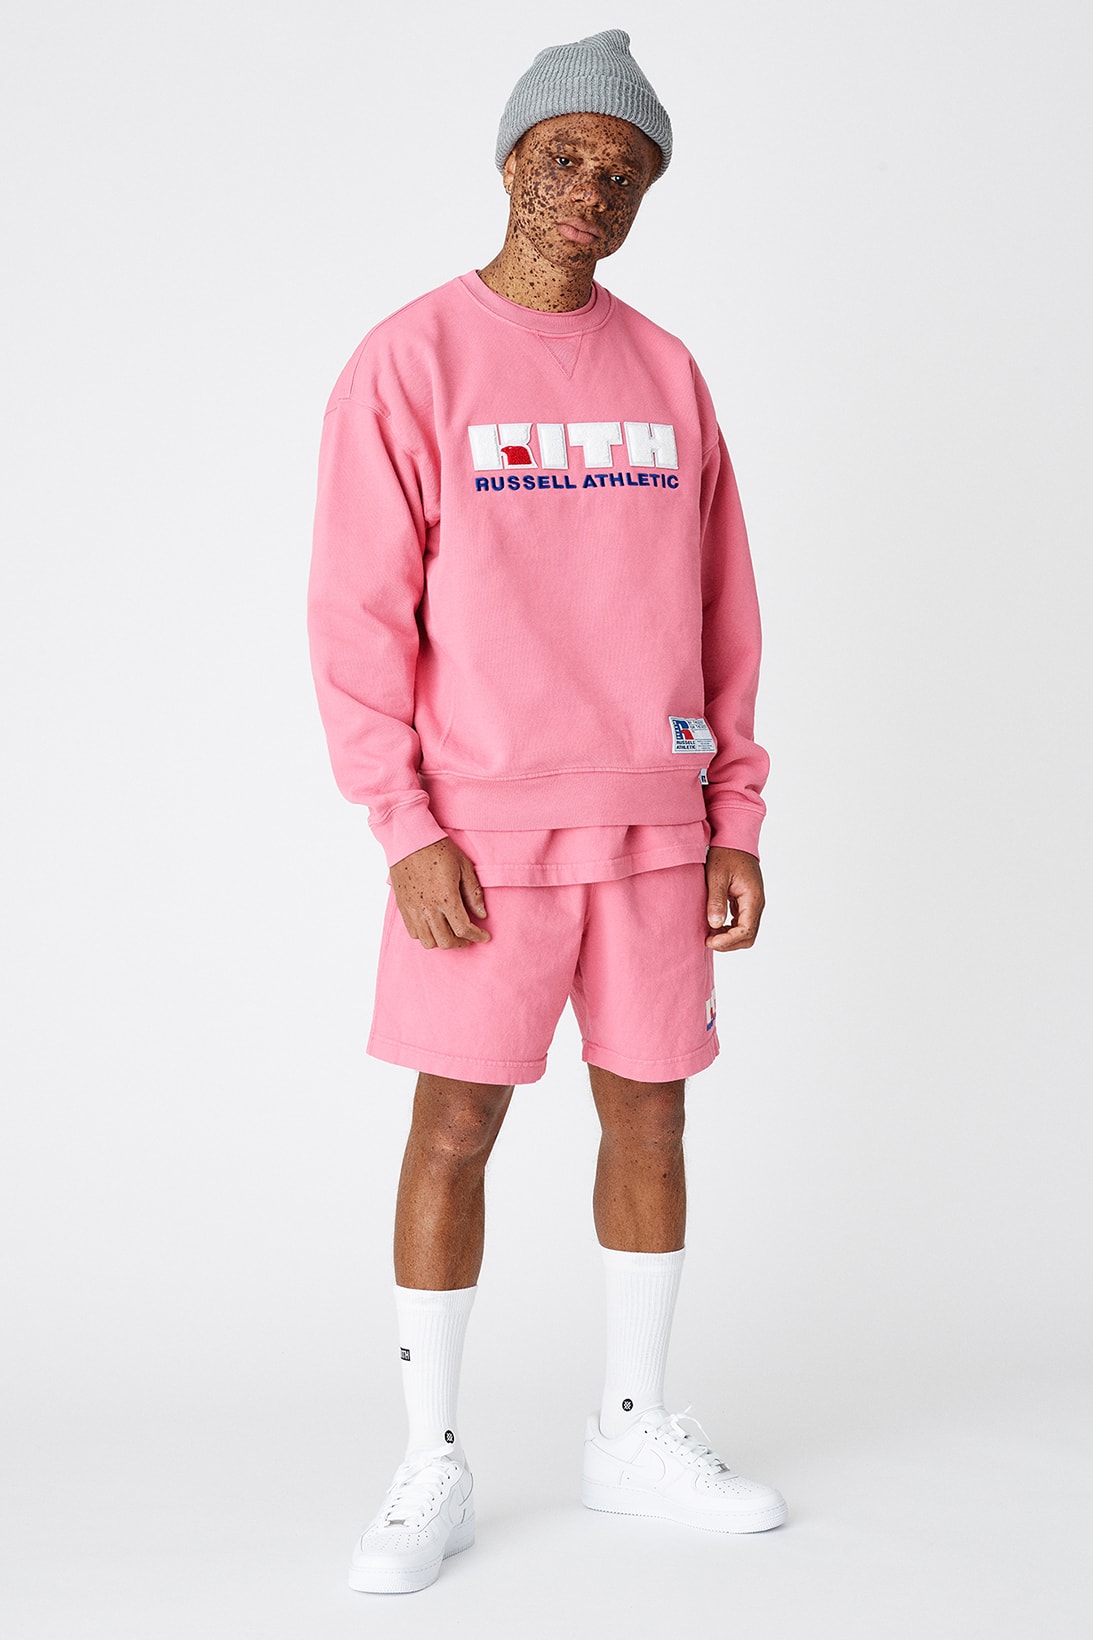 KITH Russell Athletic Unisex Collaboration Pastel Graphic T-Shirt Hoodie Sweatshirt Shorts Ronnie Fieg